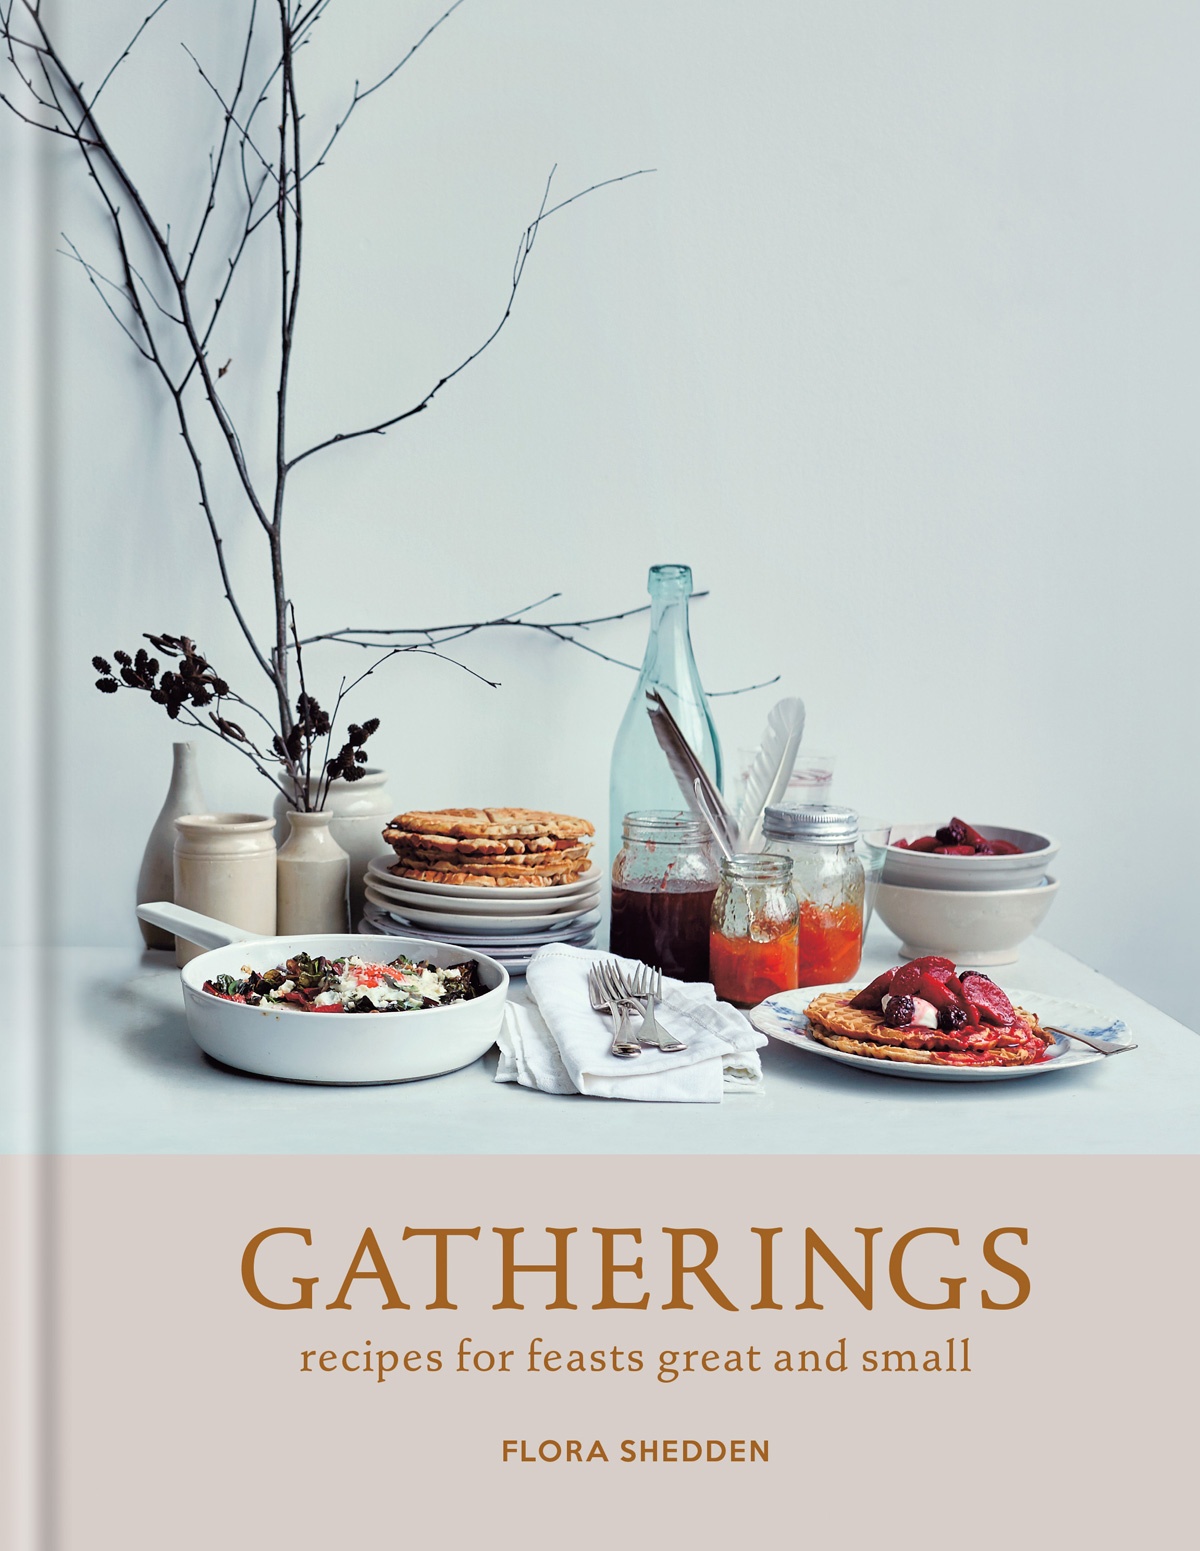 Book cover of Gatherings by Flora Shedden